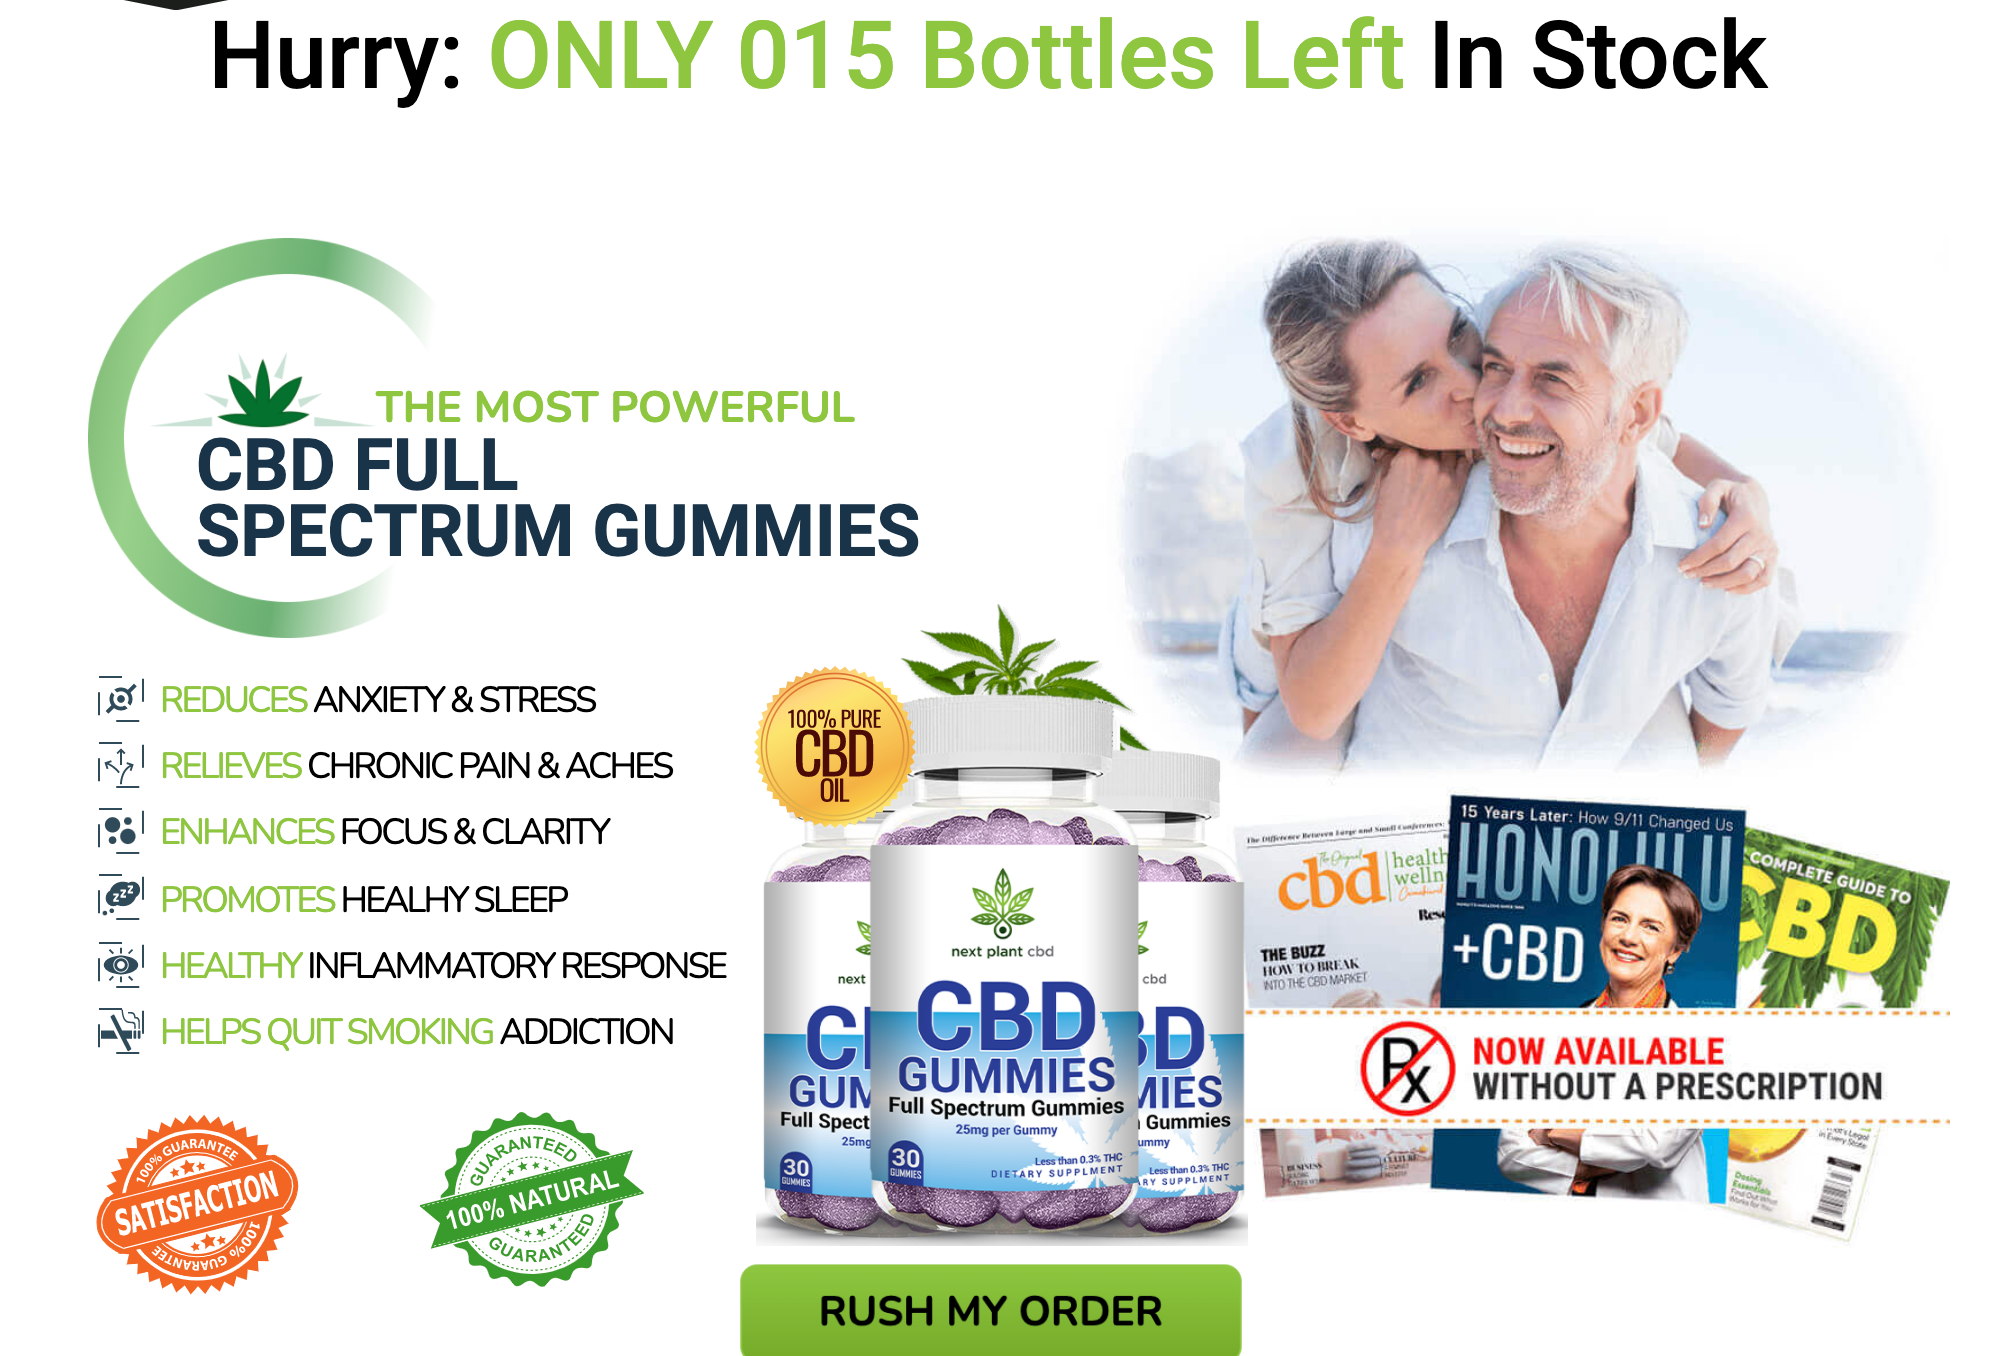 Next Plant CBD Gummies Reviews – *Shocking* Learn This Now Before Buying !  - Business